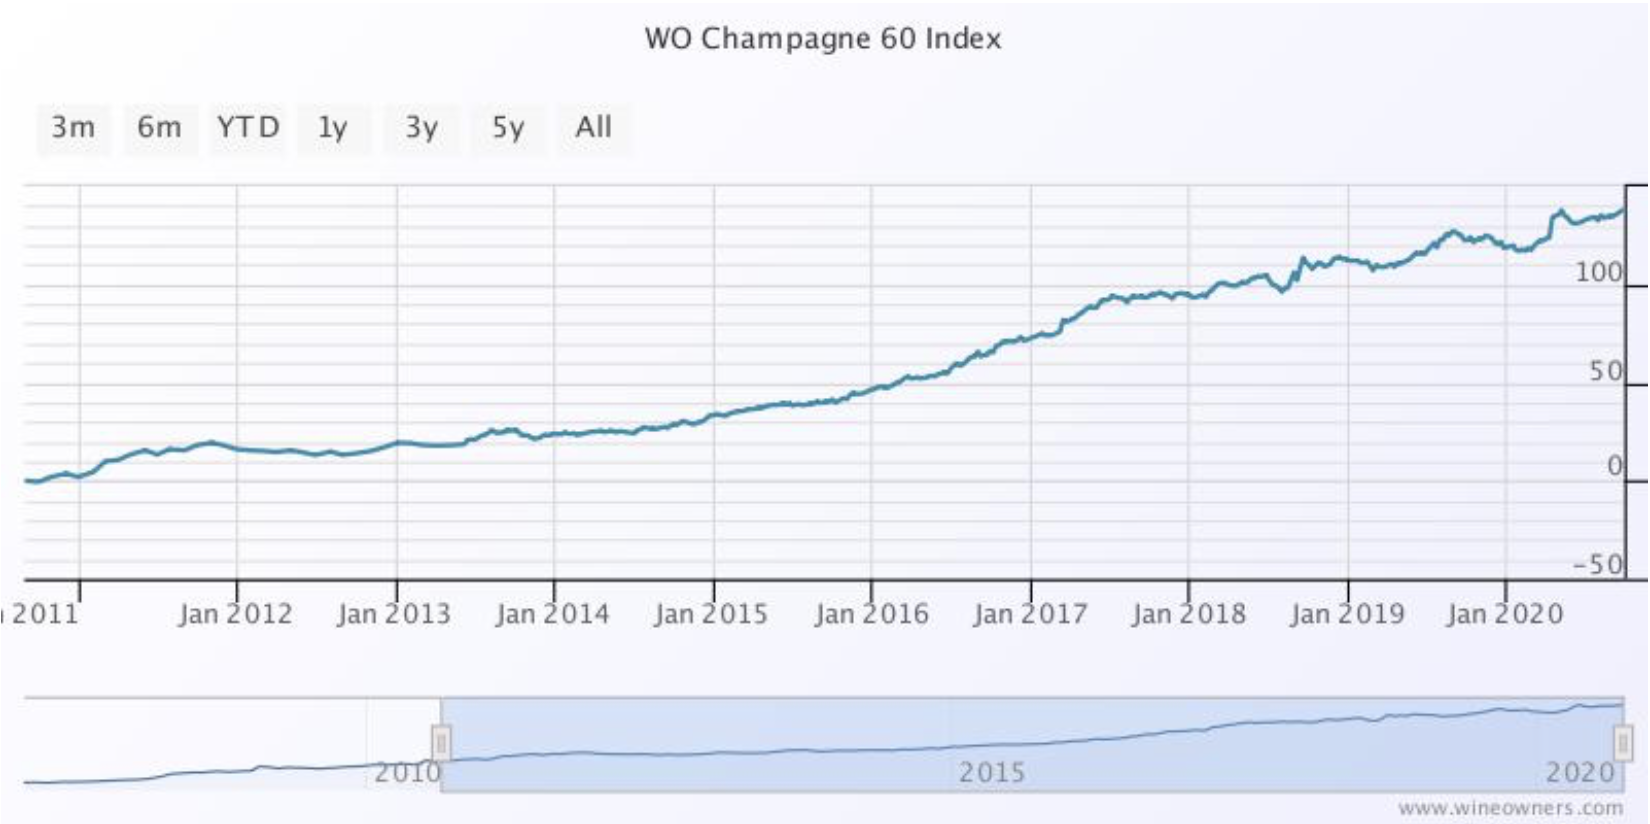 Wine Owners - WO Champagne 60 Index - Sept 2020